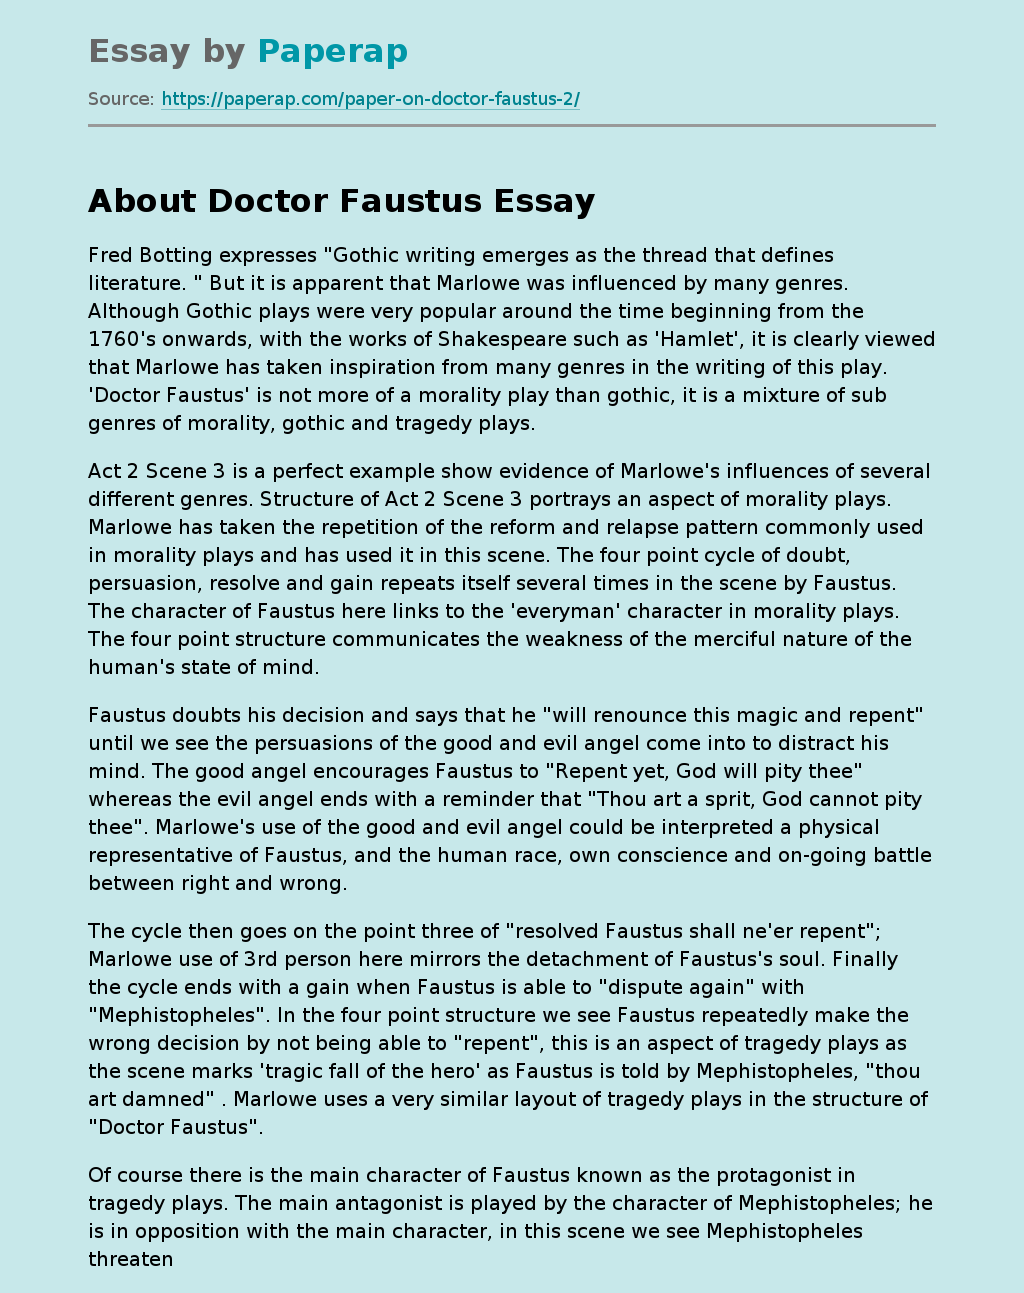 About Doctor Faustus